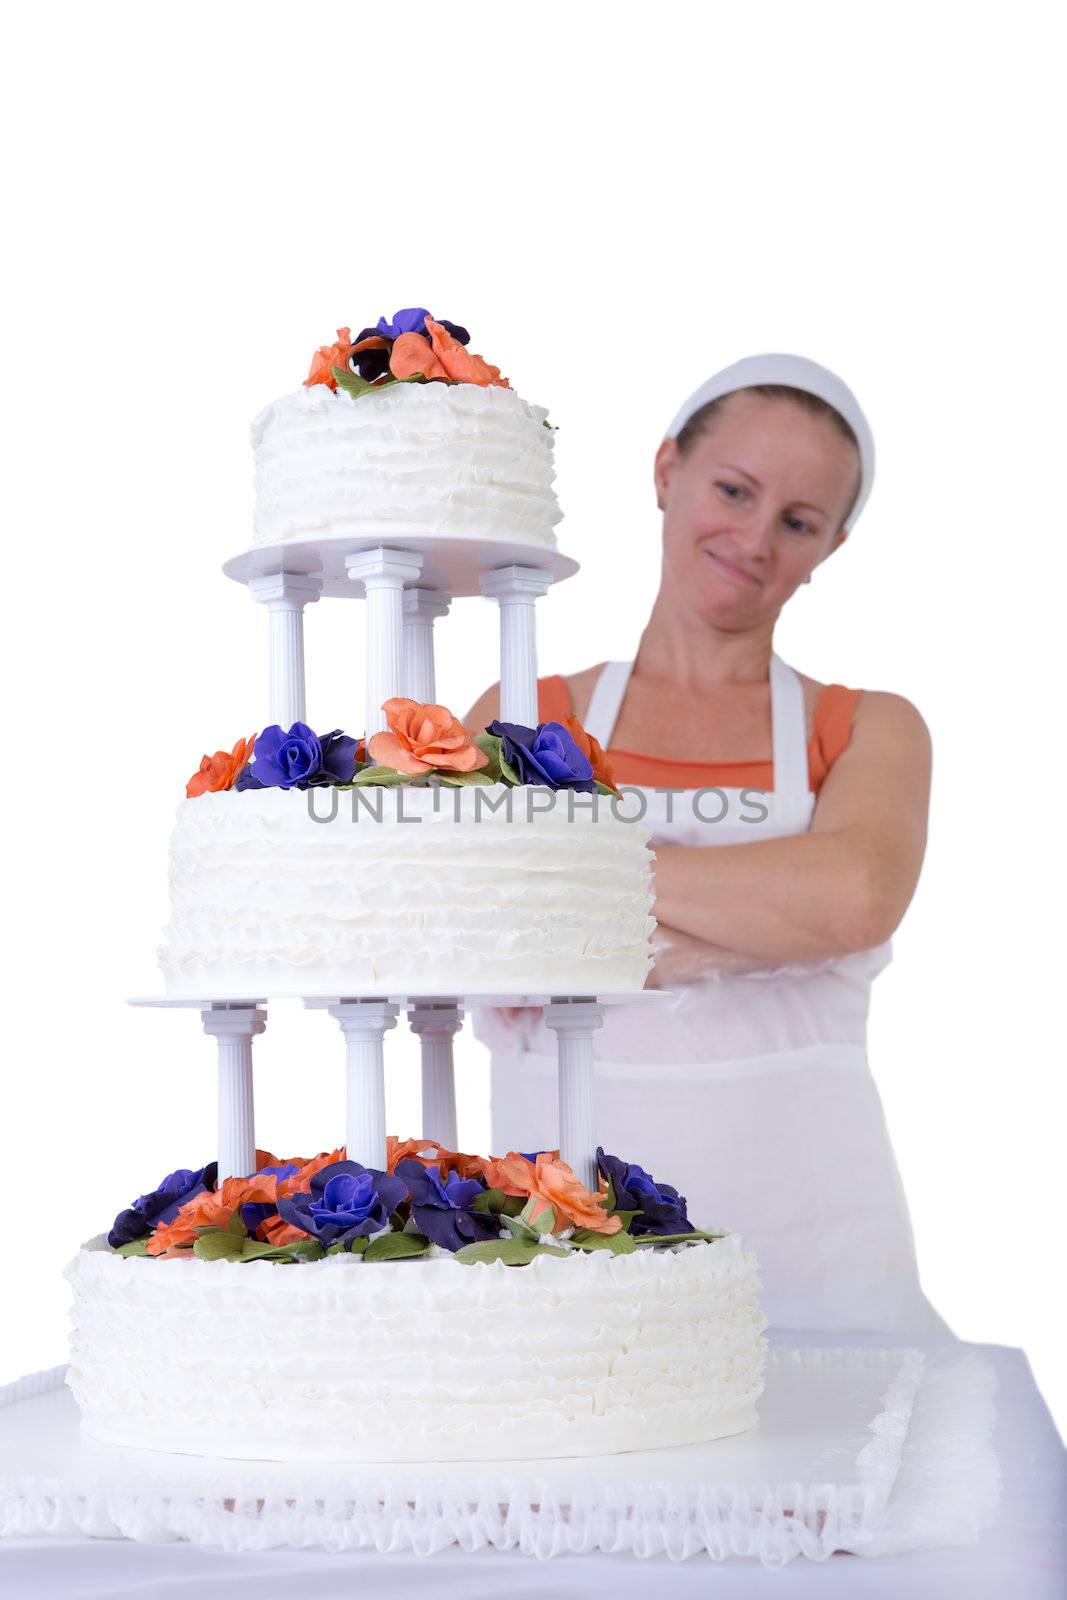 Baker lady giving to a wedding cake latest proud look in her apron and white bandanna, cake has fondant ruffles on the side and decorated with orange and purple gum paste roses